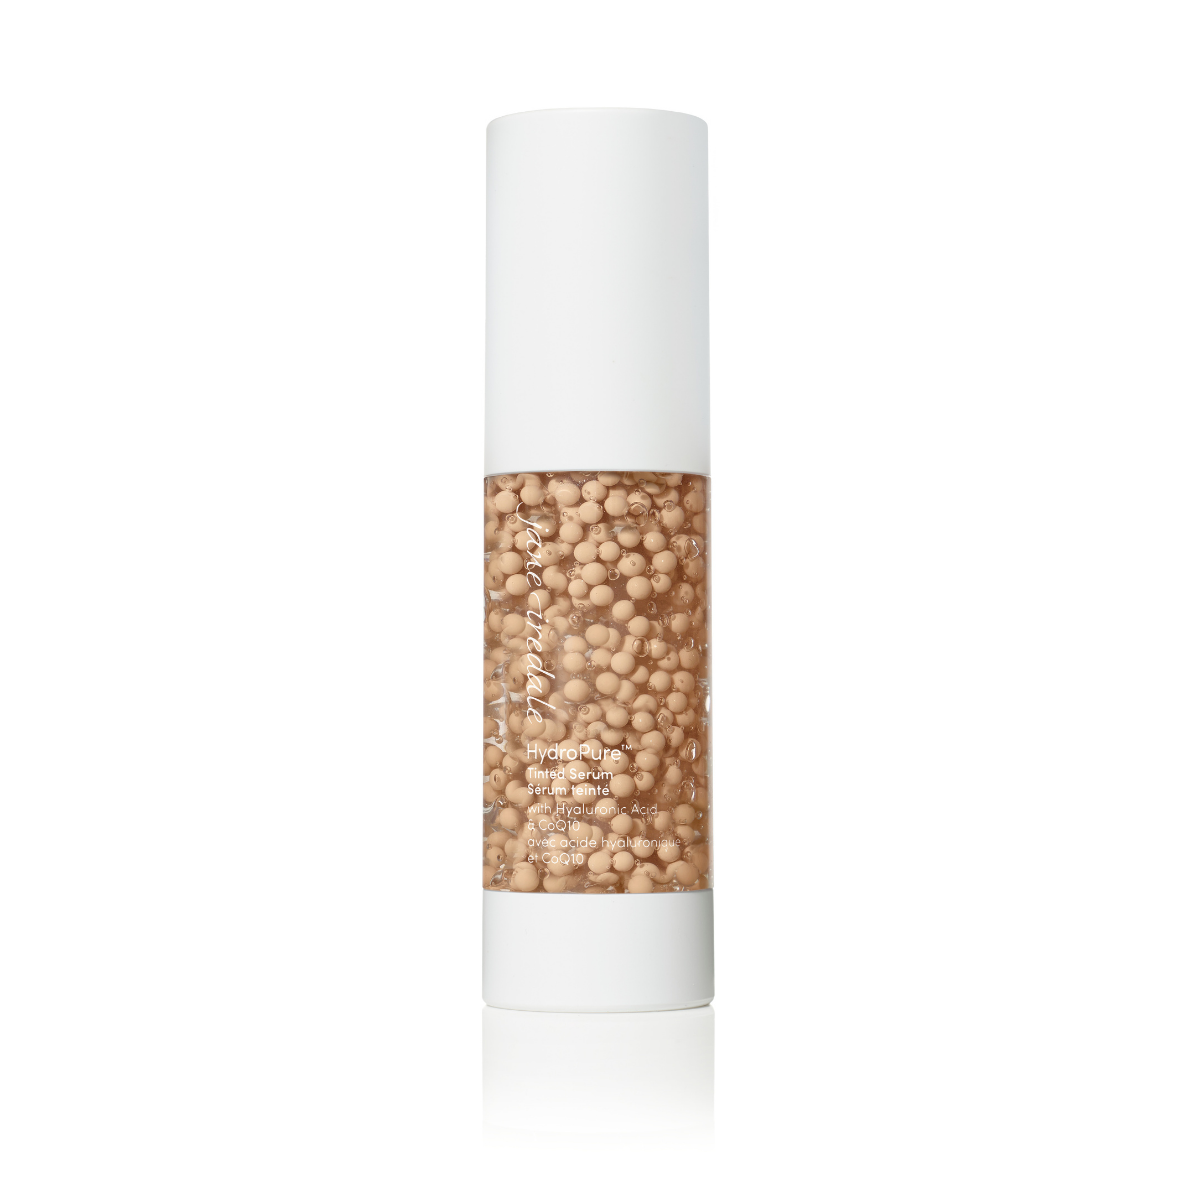 Jane Iredale HydroPure Tinted Serum Fair Shop At Exclusive Beauty